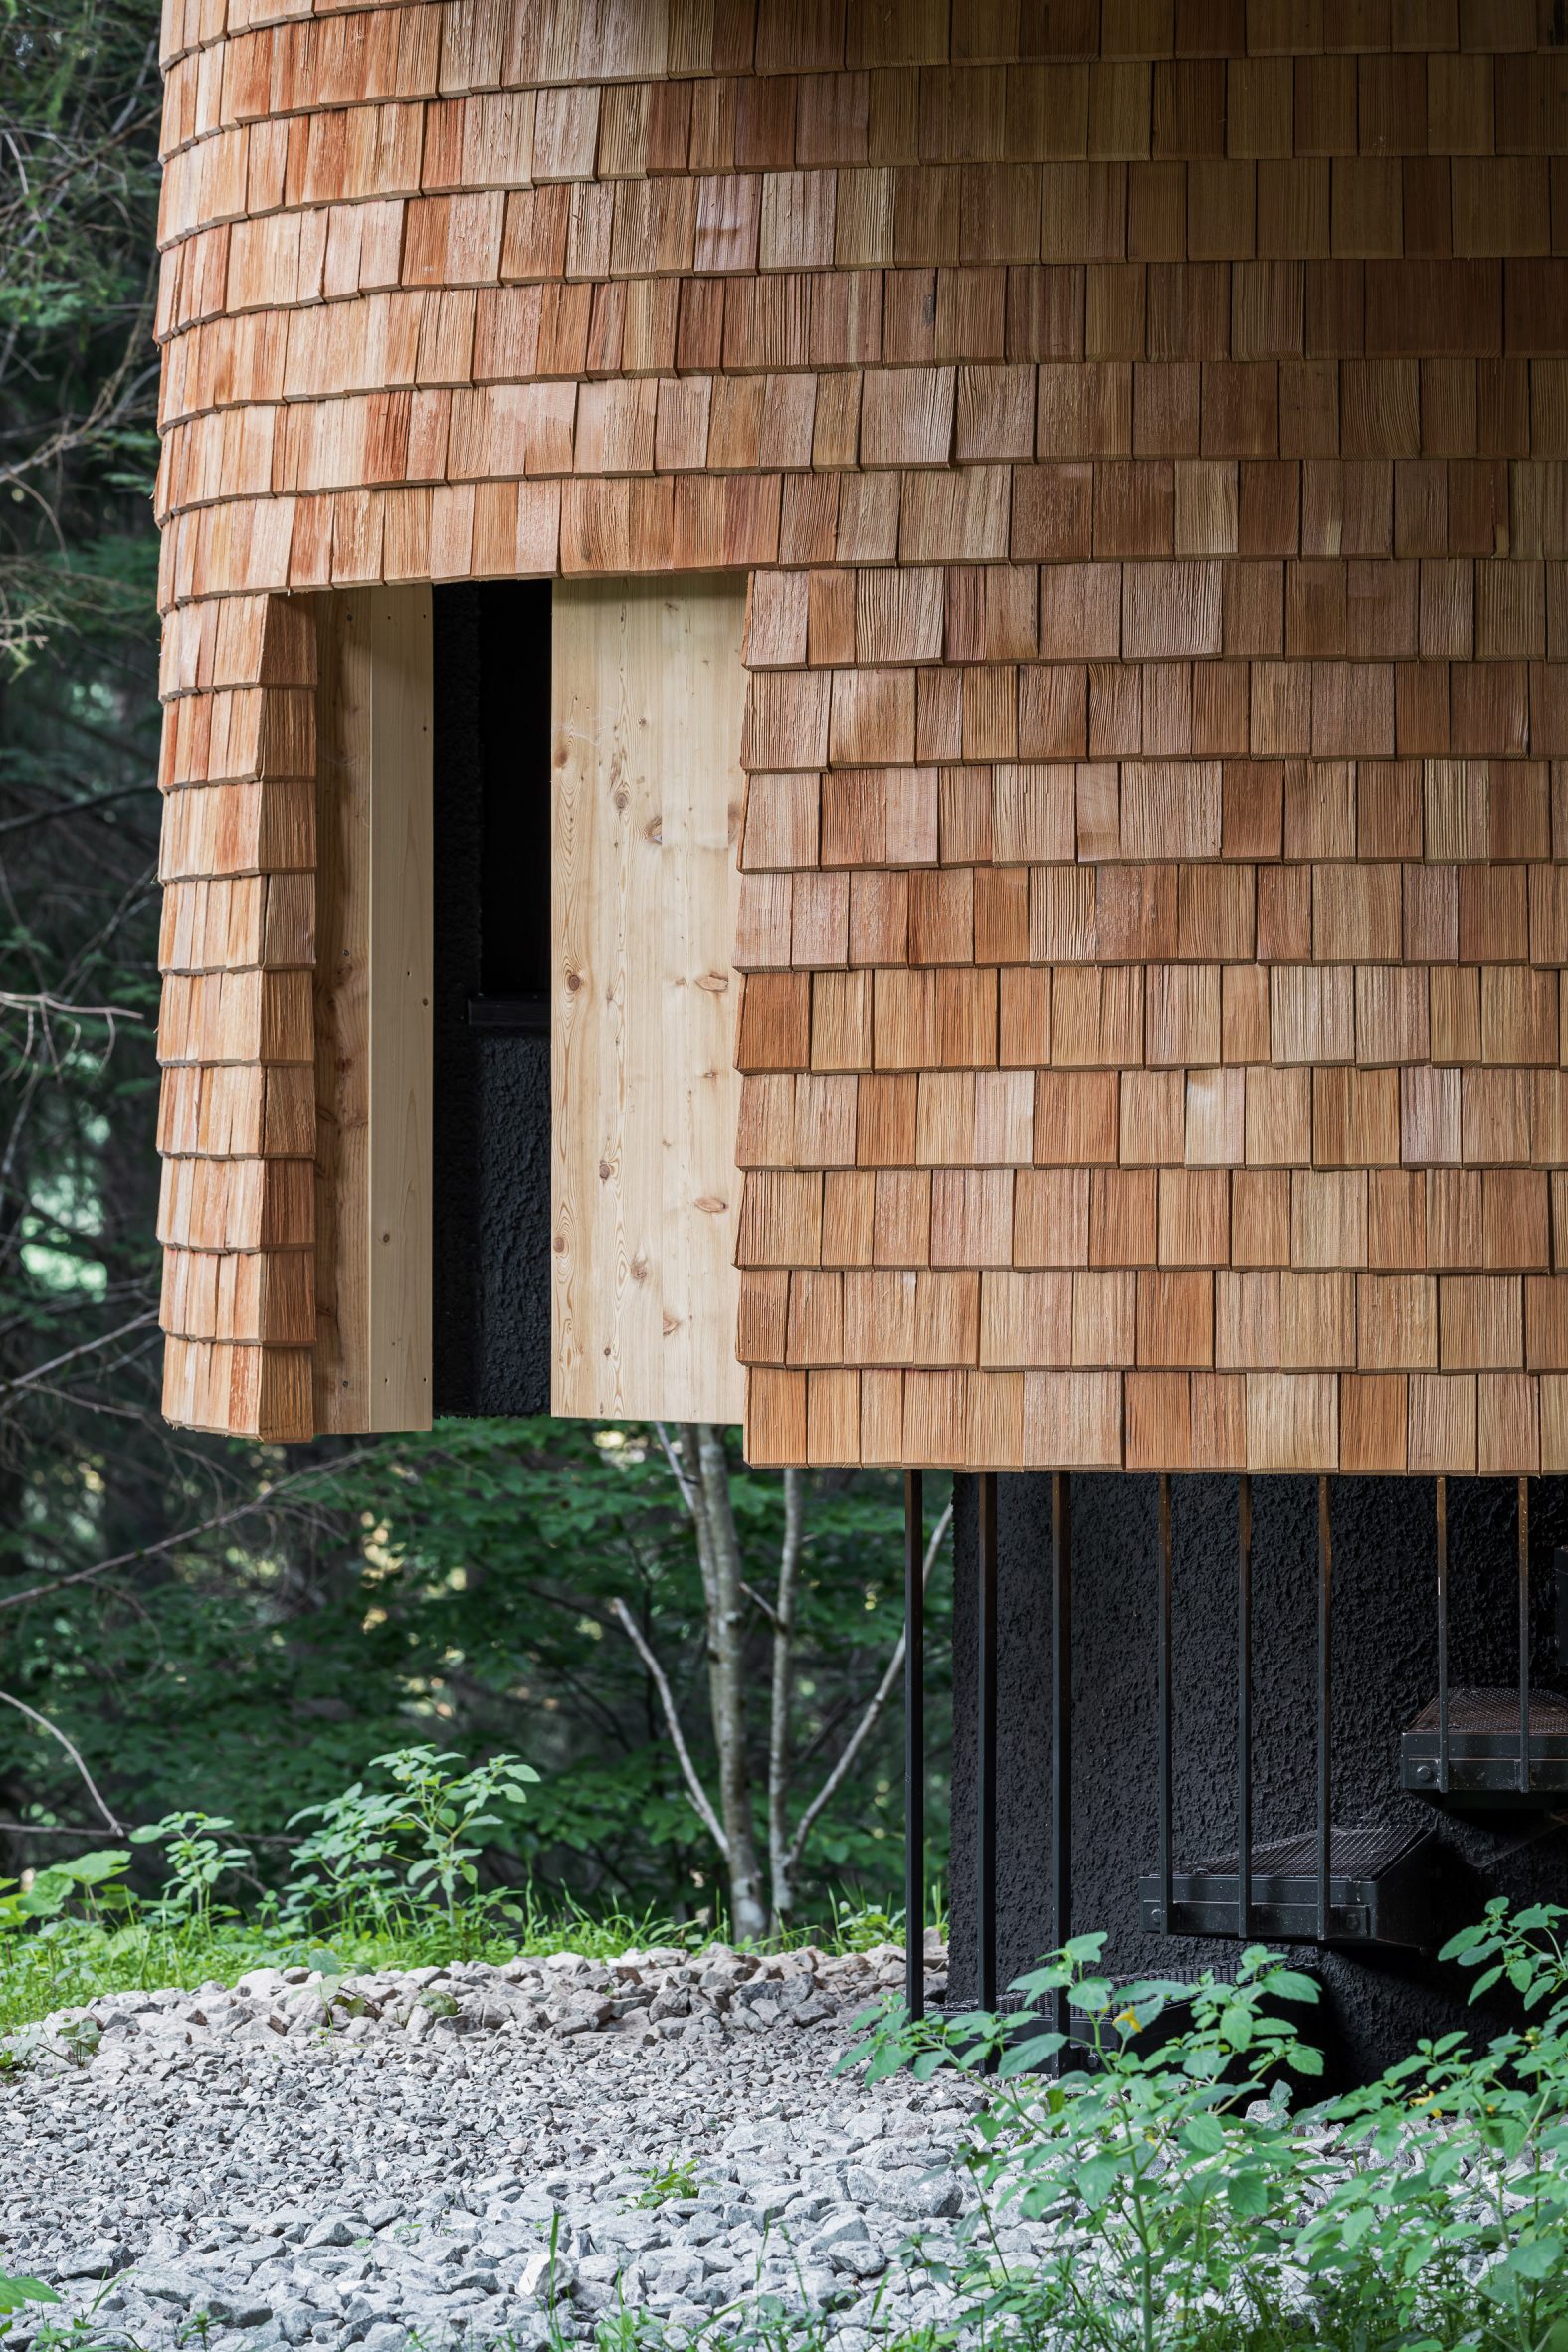 The exterior of Bert uses a layered wooden board material